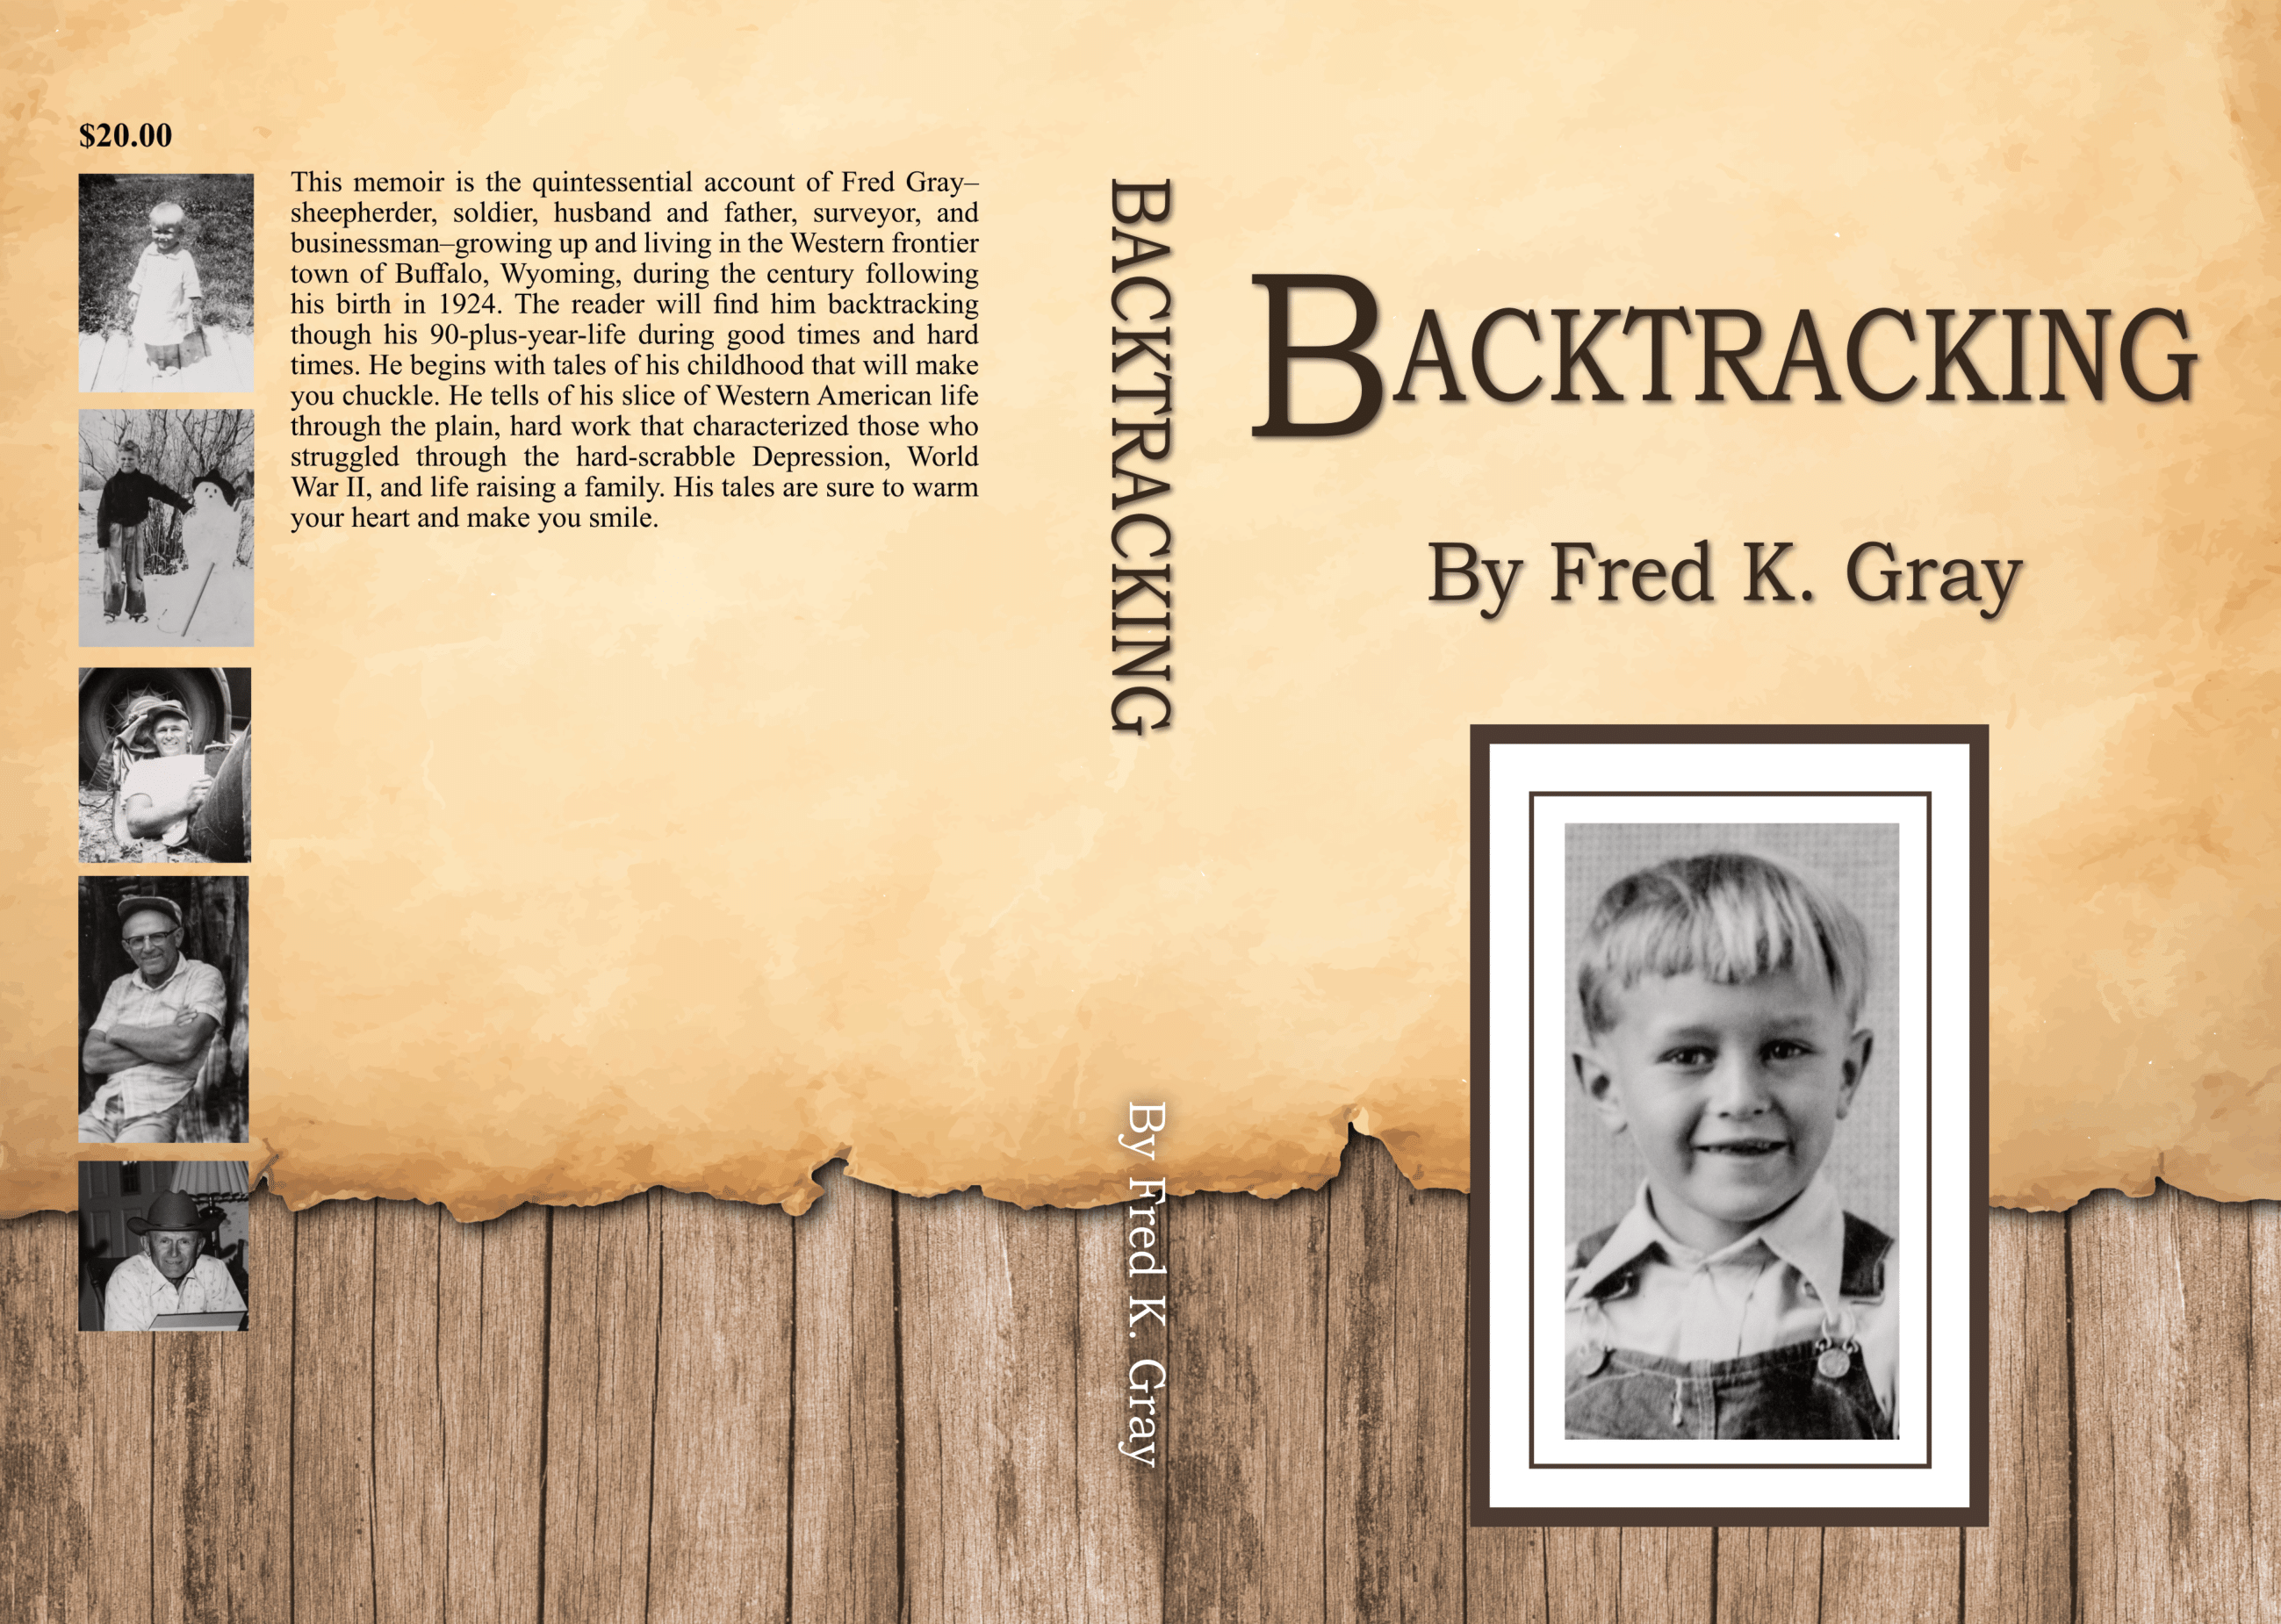 Backtracking By Fred K. Gray Image